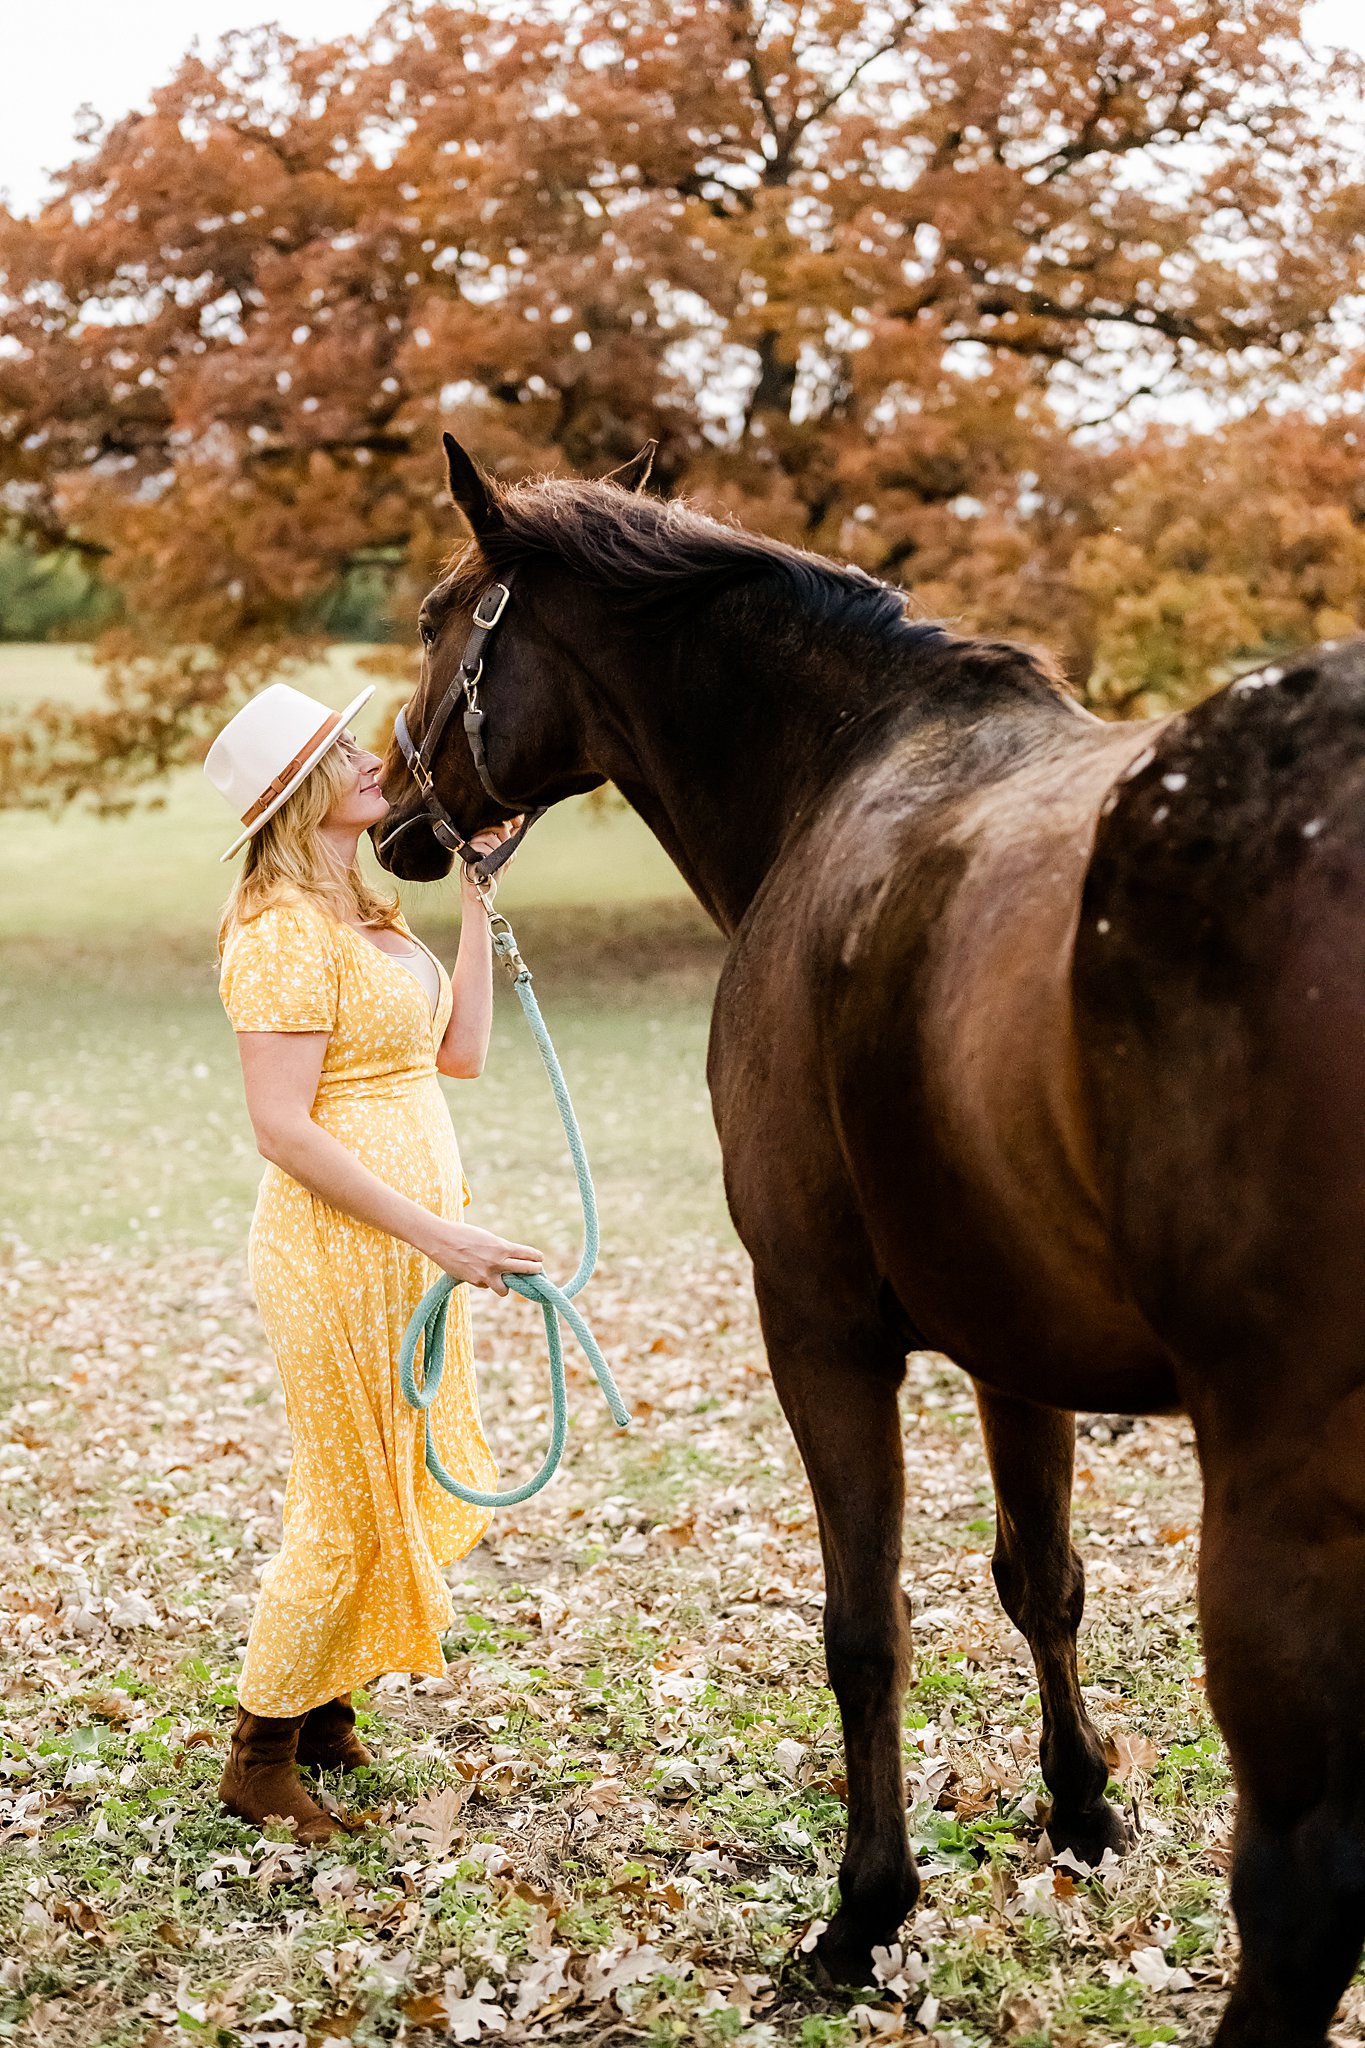 Women in yellow sundress and large hat holds horse lead and scratches the horse's chin in a large open field horseback riding chicago